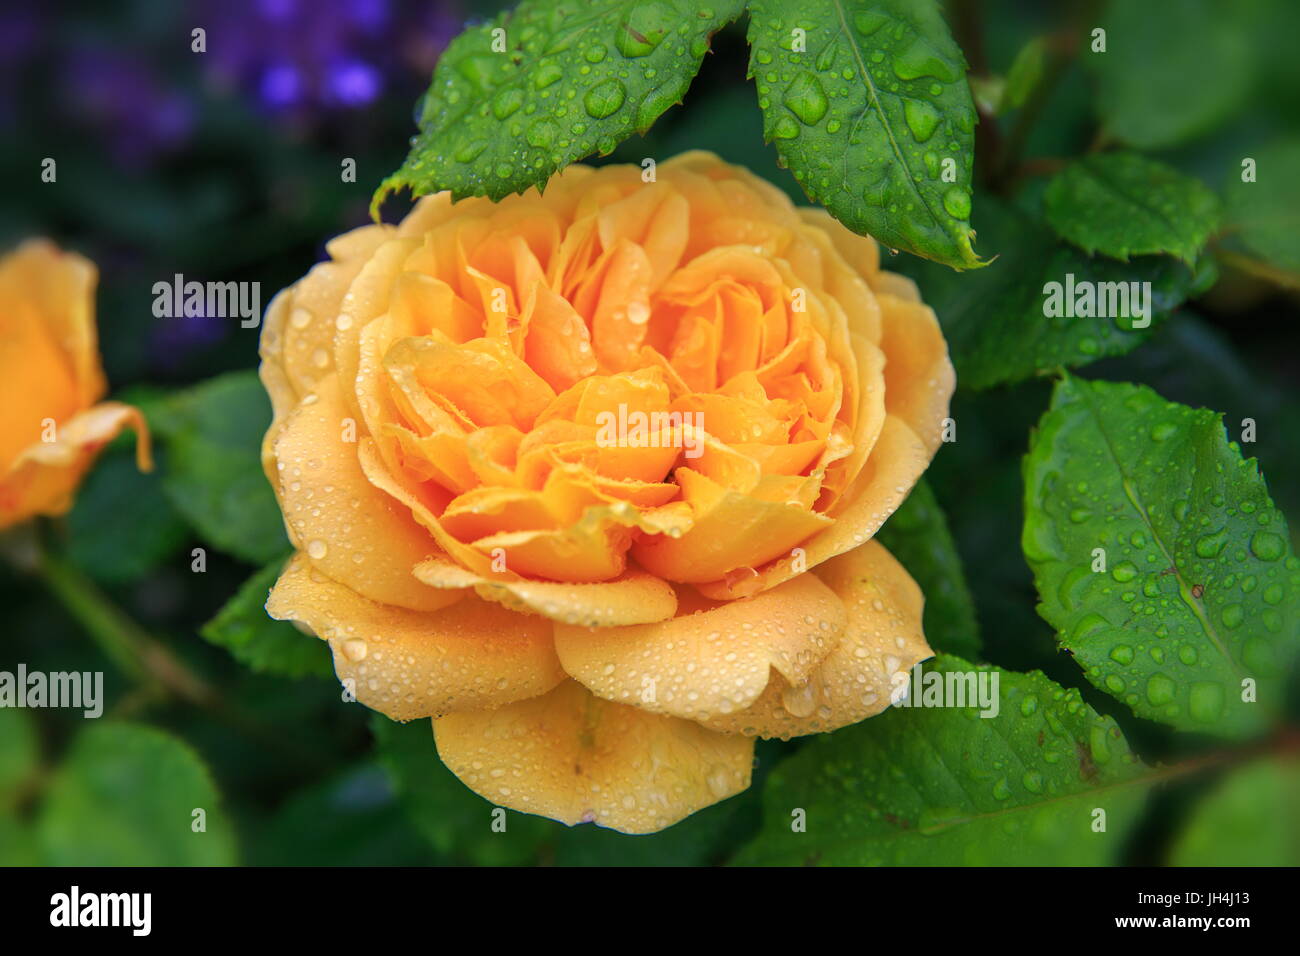 Blooming yellow rose in the garden on a sunny day. David Austin Rose Golden Celebration 'AUShunter'. Stock Photo